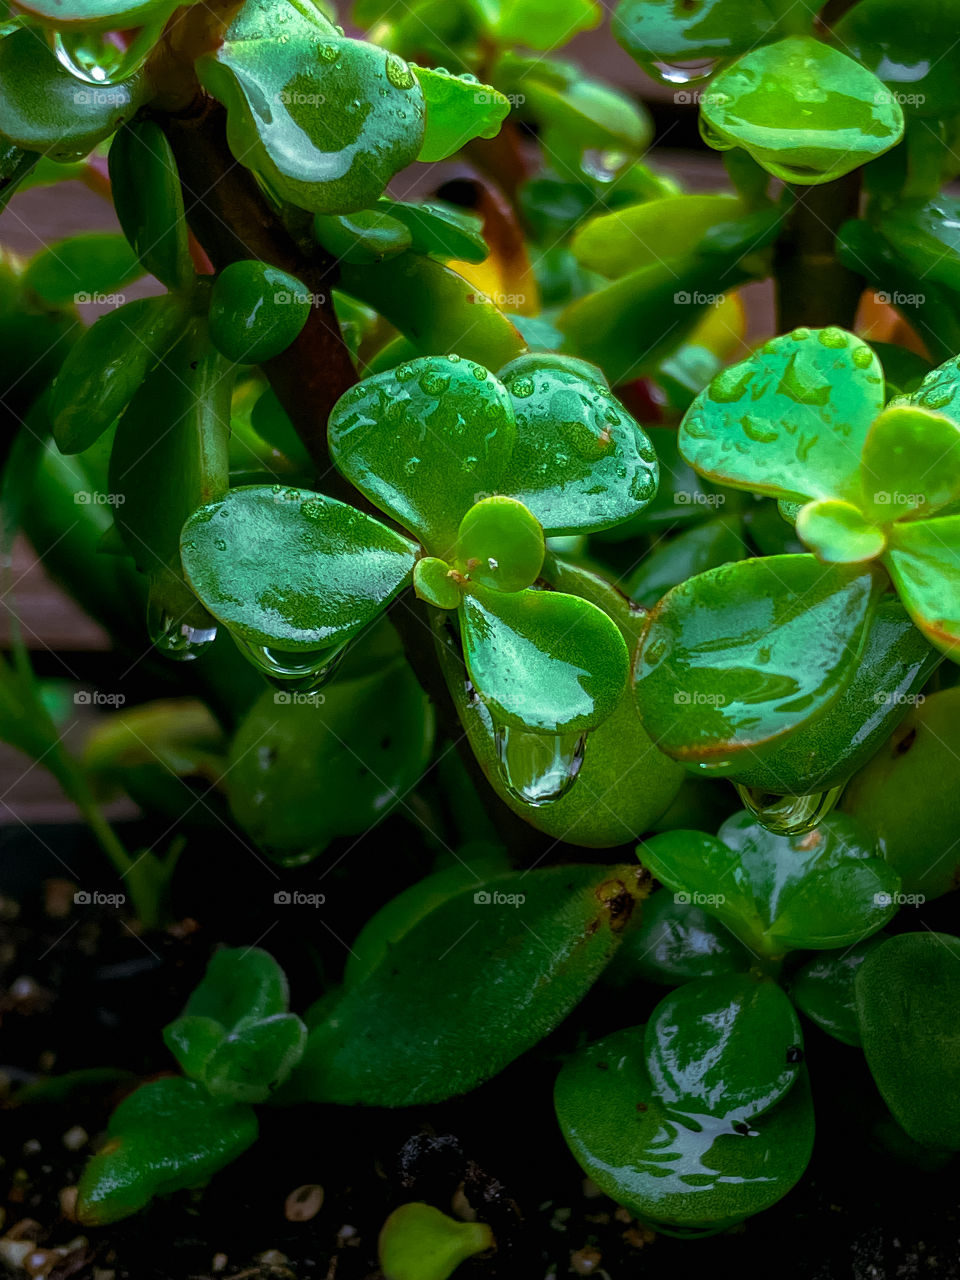 Plant plants waterdrops water wet mother nature outdoors leafs petals water droplets rainwater Rainfall raindrops rain droplets rubber 